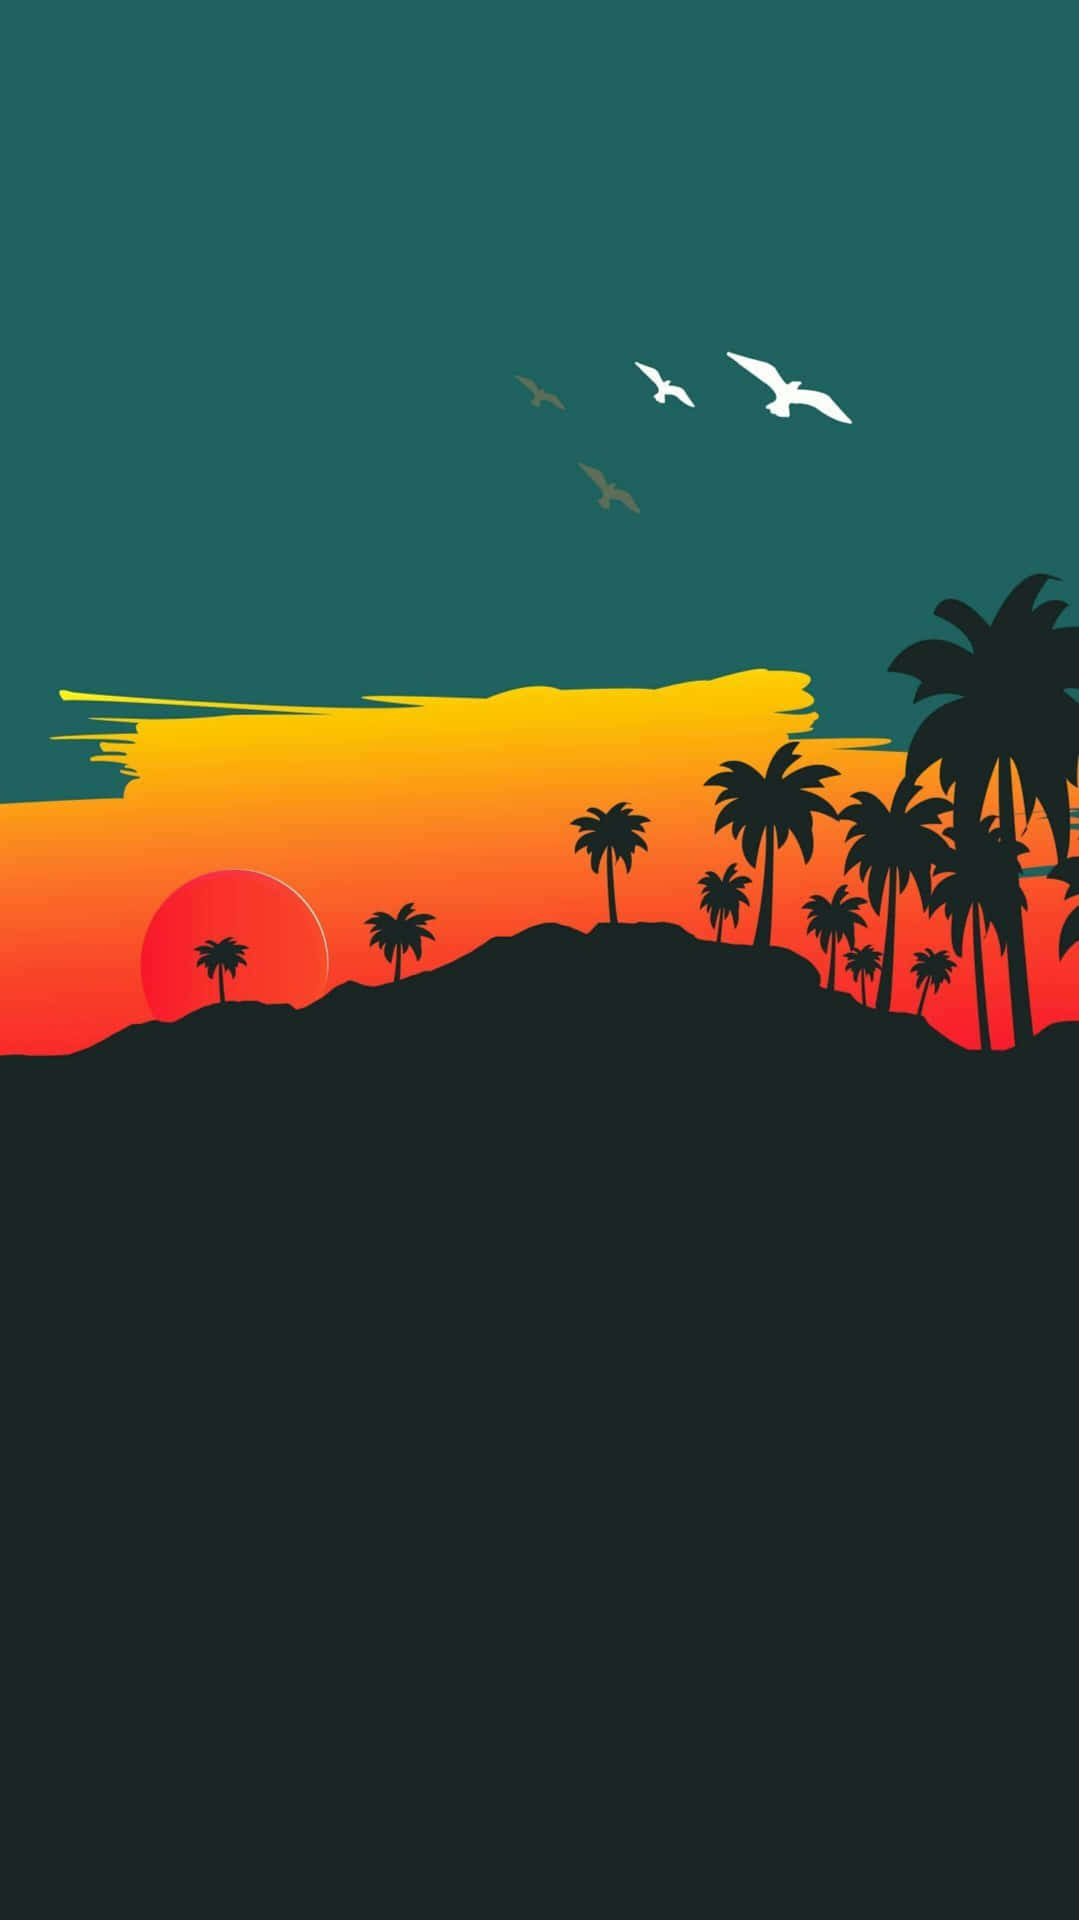 A Sunset With Palm Trees And Birds Wallpaper